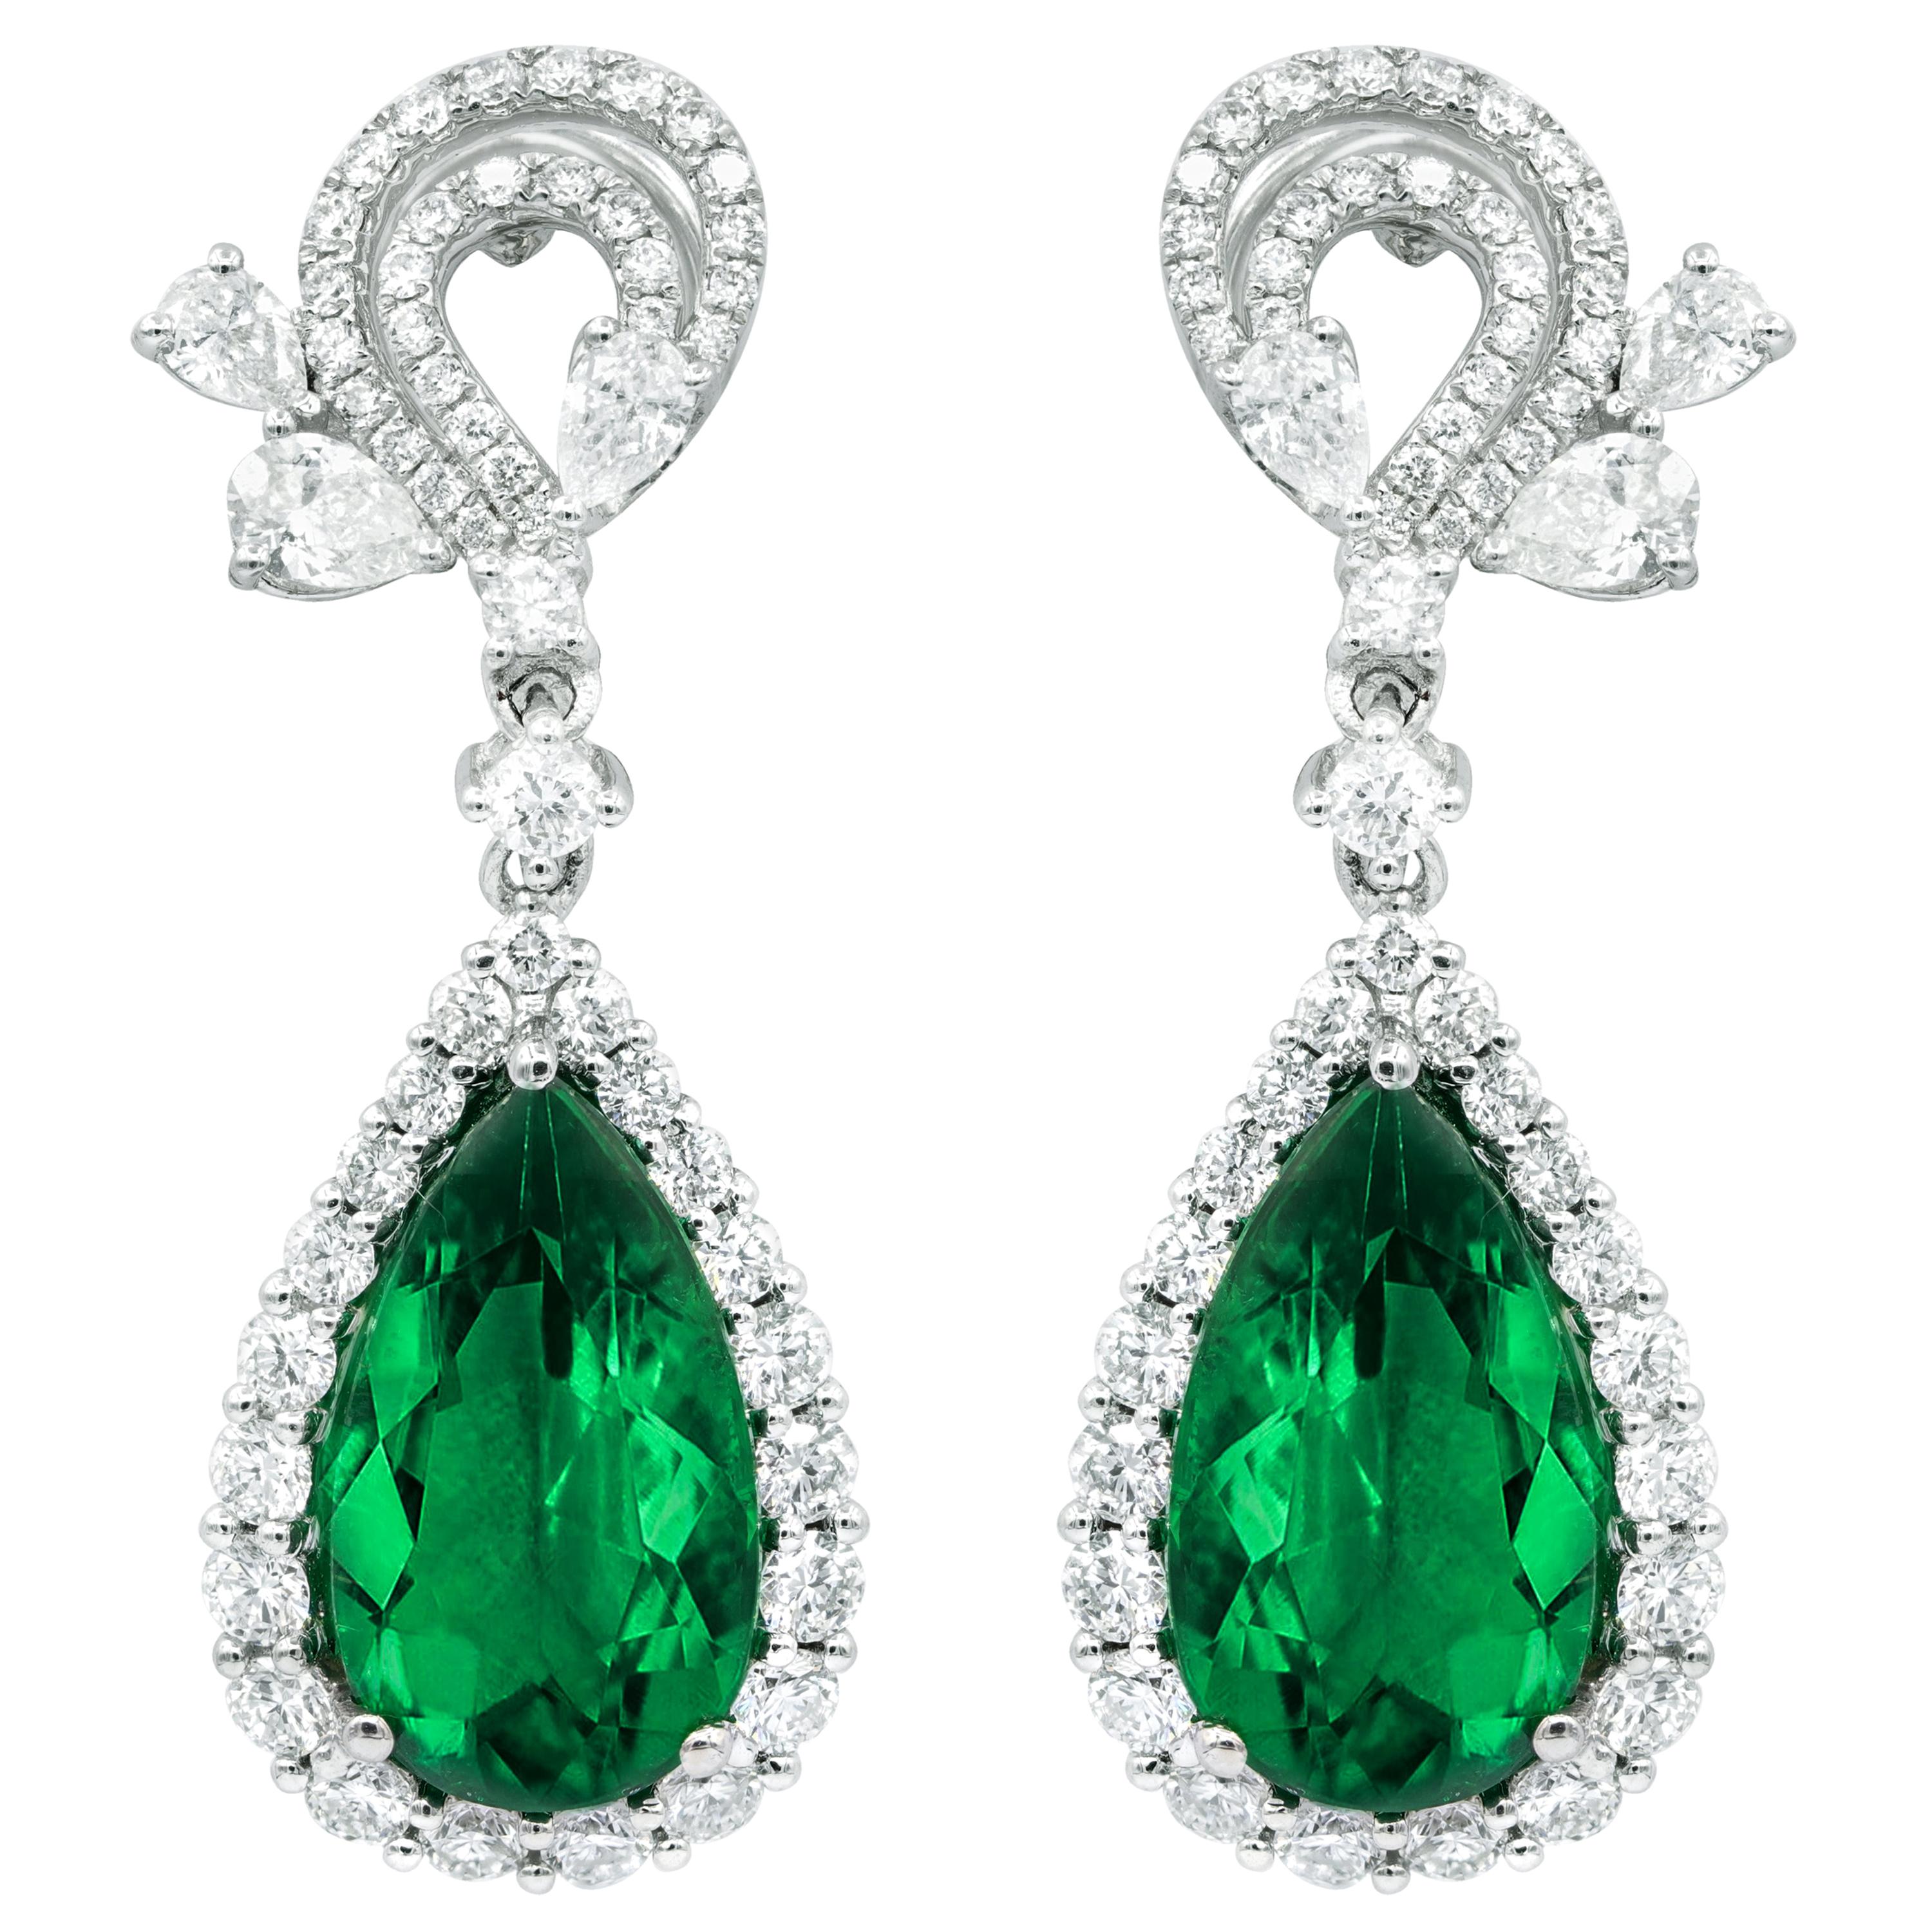 White Gold 11 Carat Diamond and Emerald Earrings For Sale